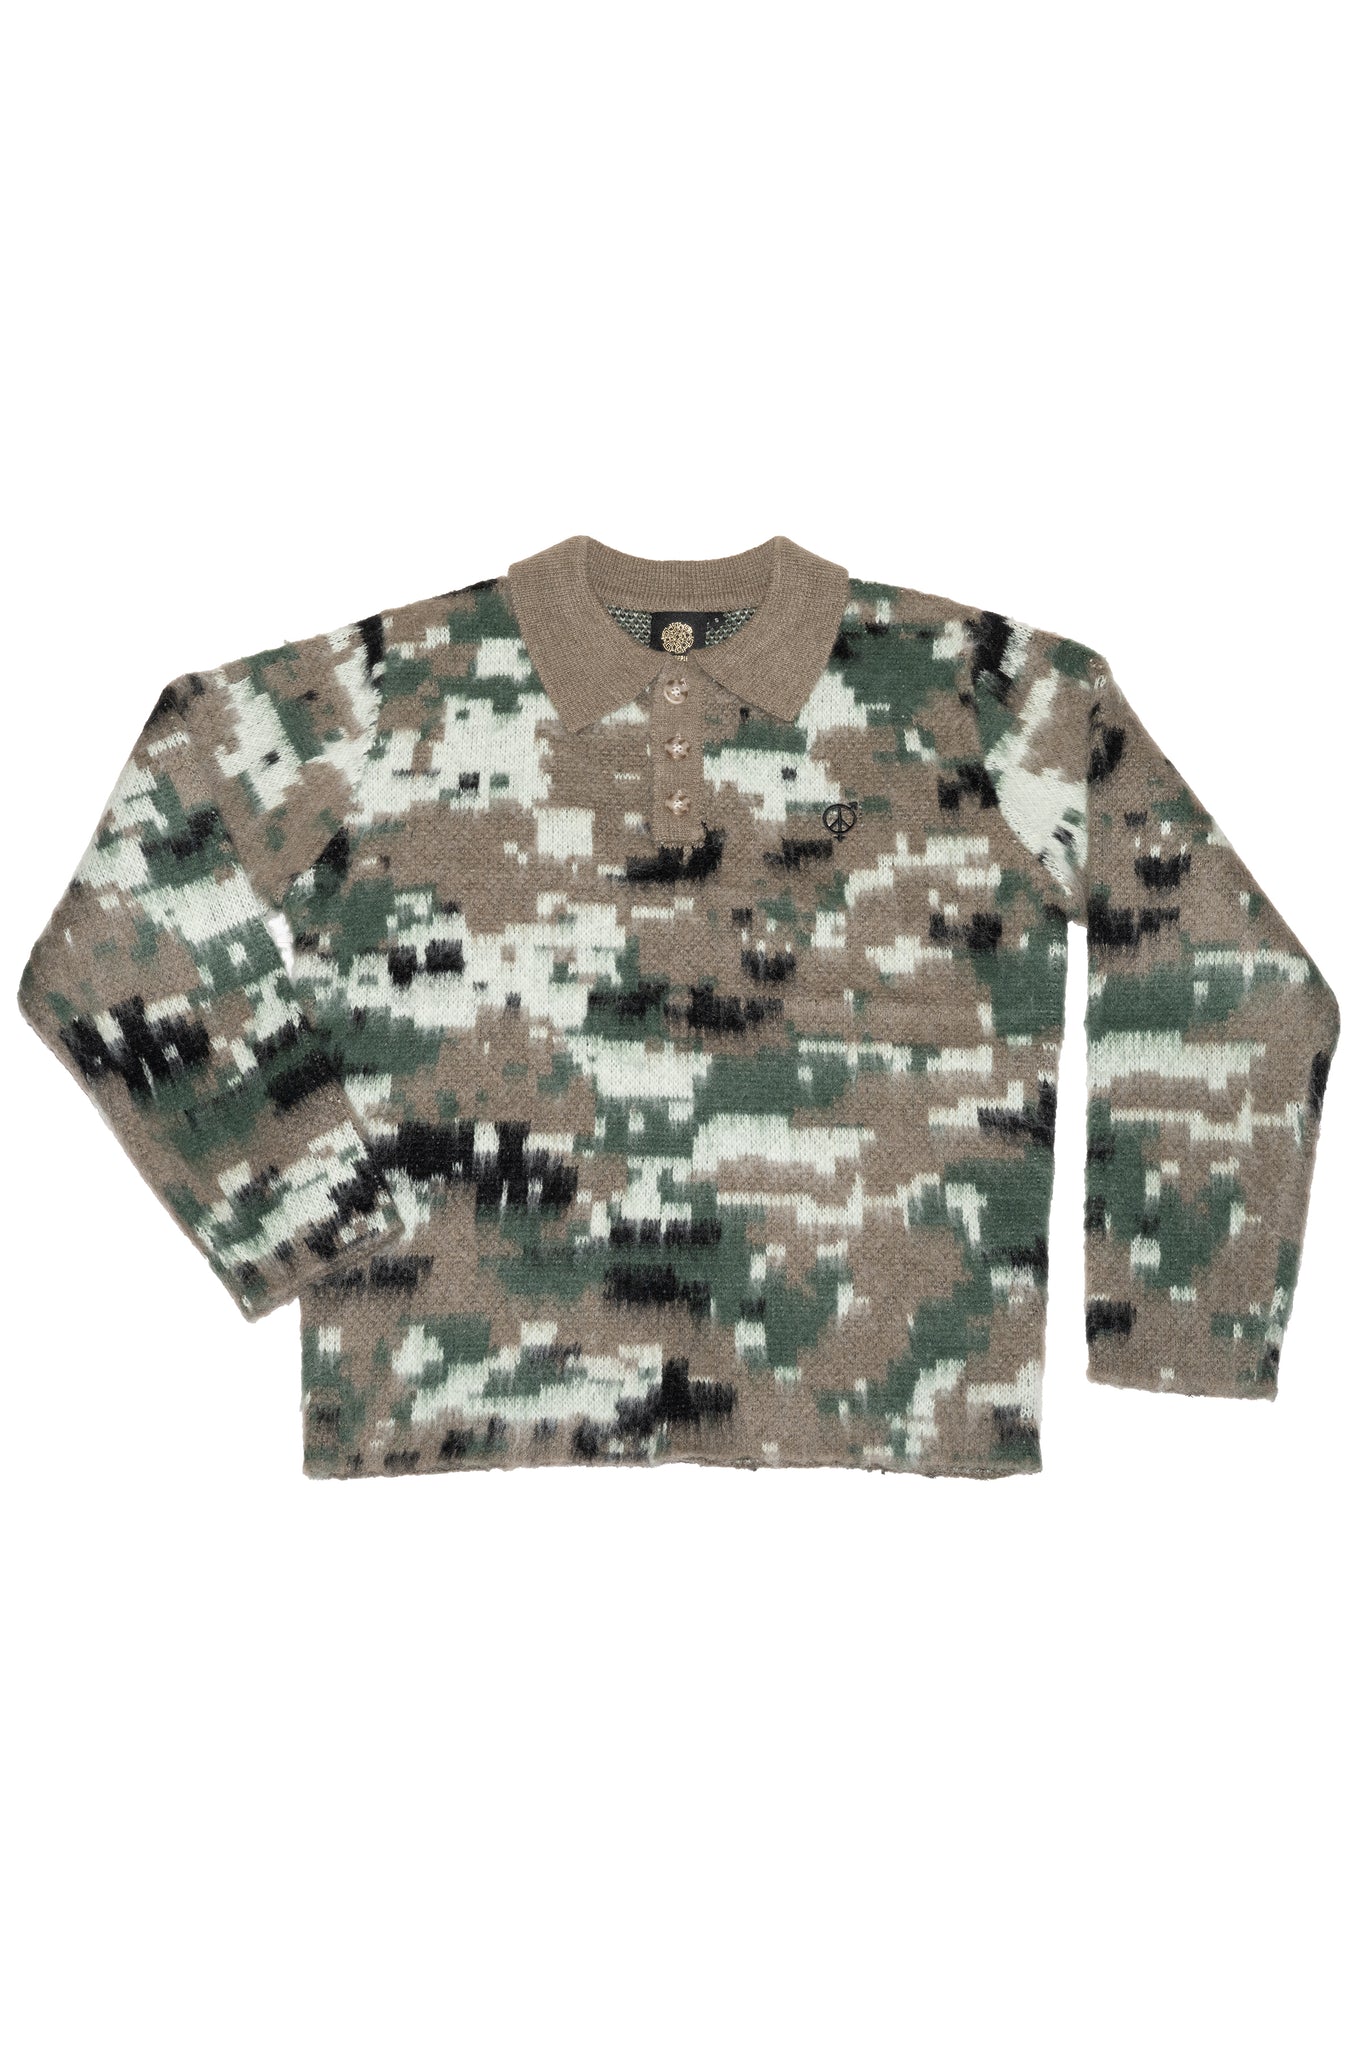 SEX HIPPIES - BRUSHED MOHAIR RUGBY SWEATER IN DIGITAL CAMO